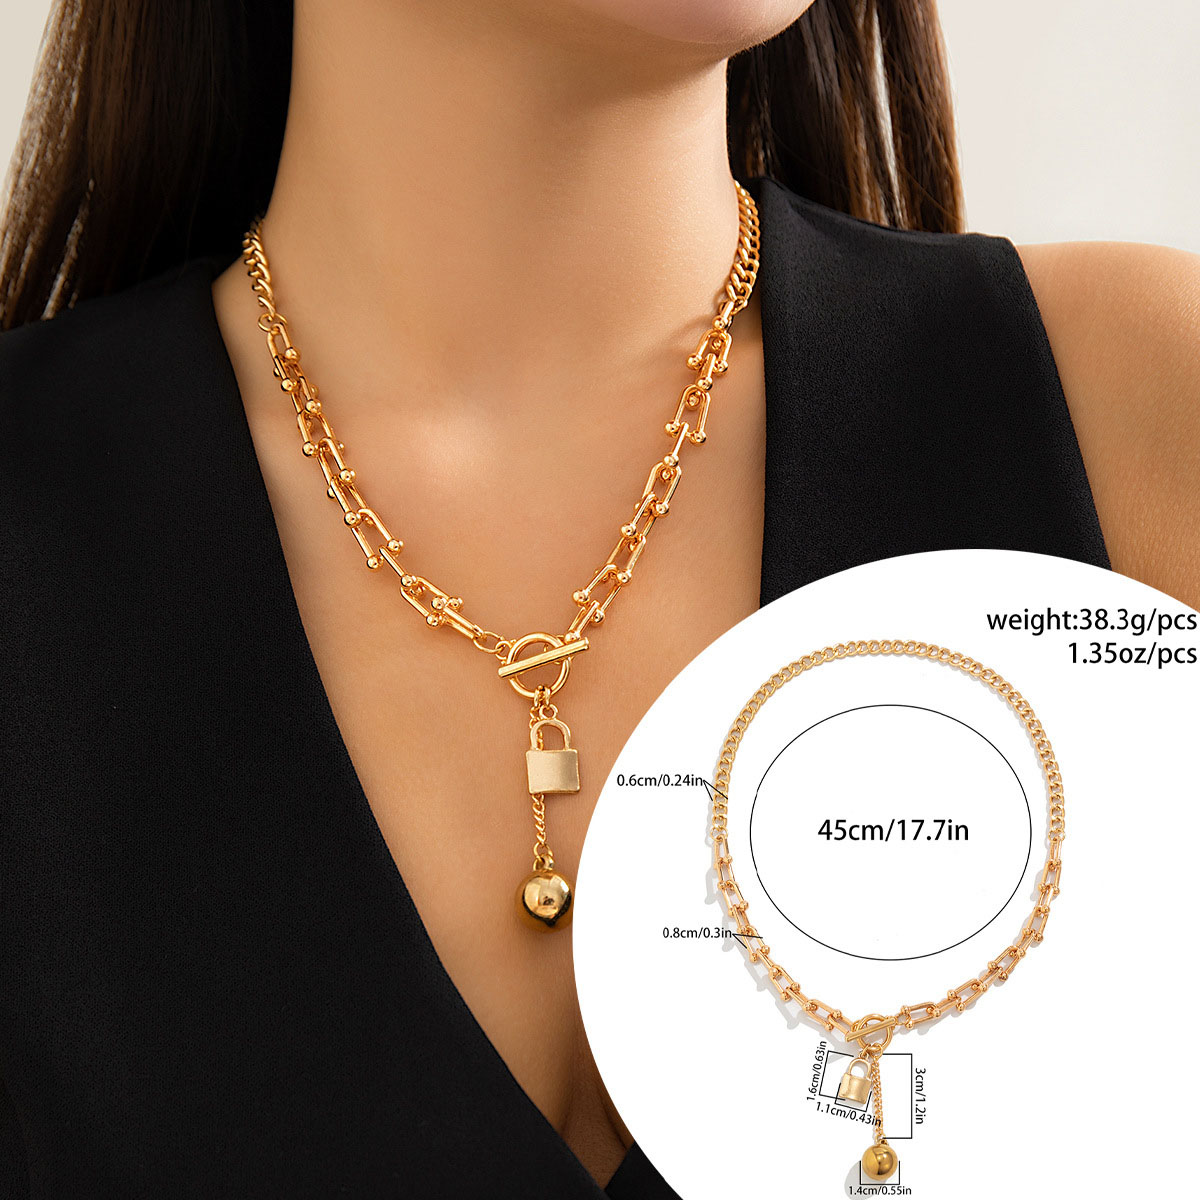 1:Gold 6208 necklace